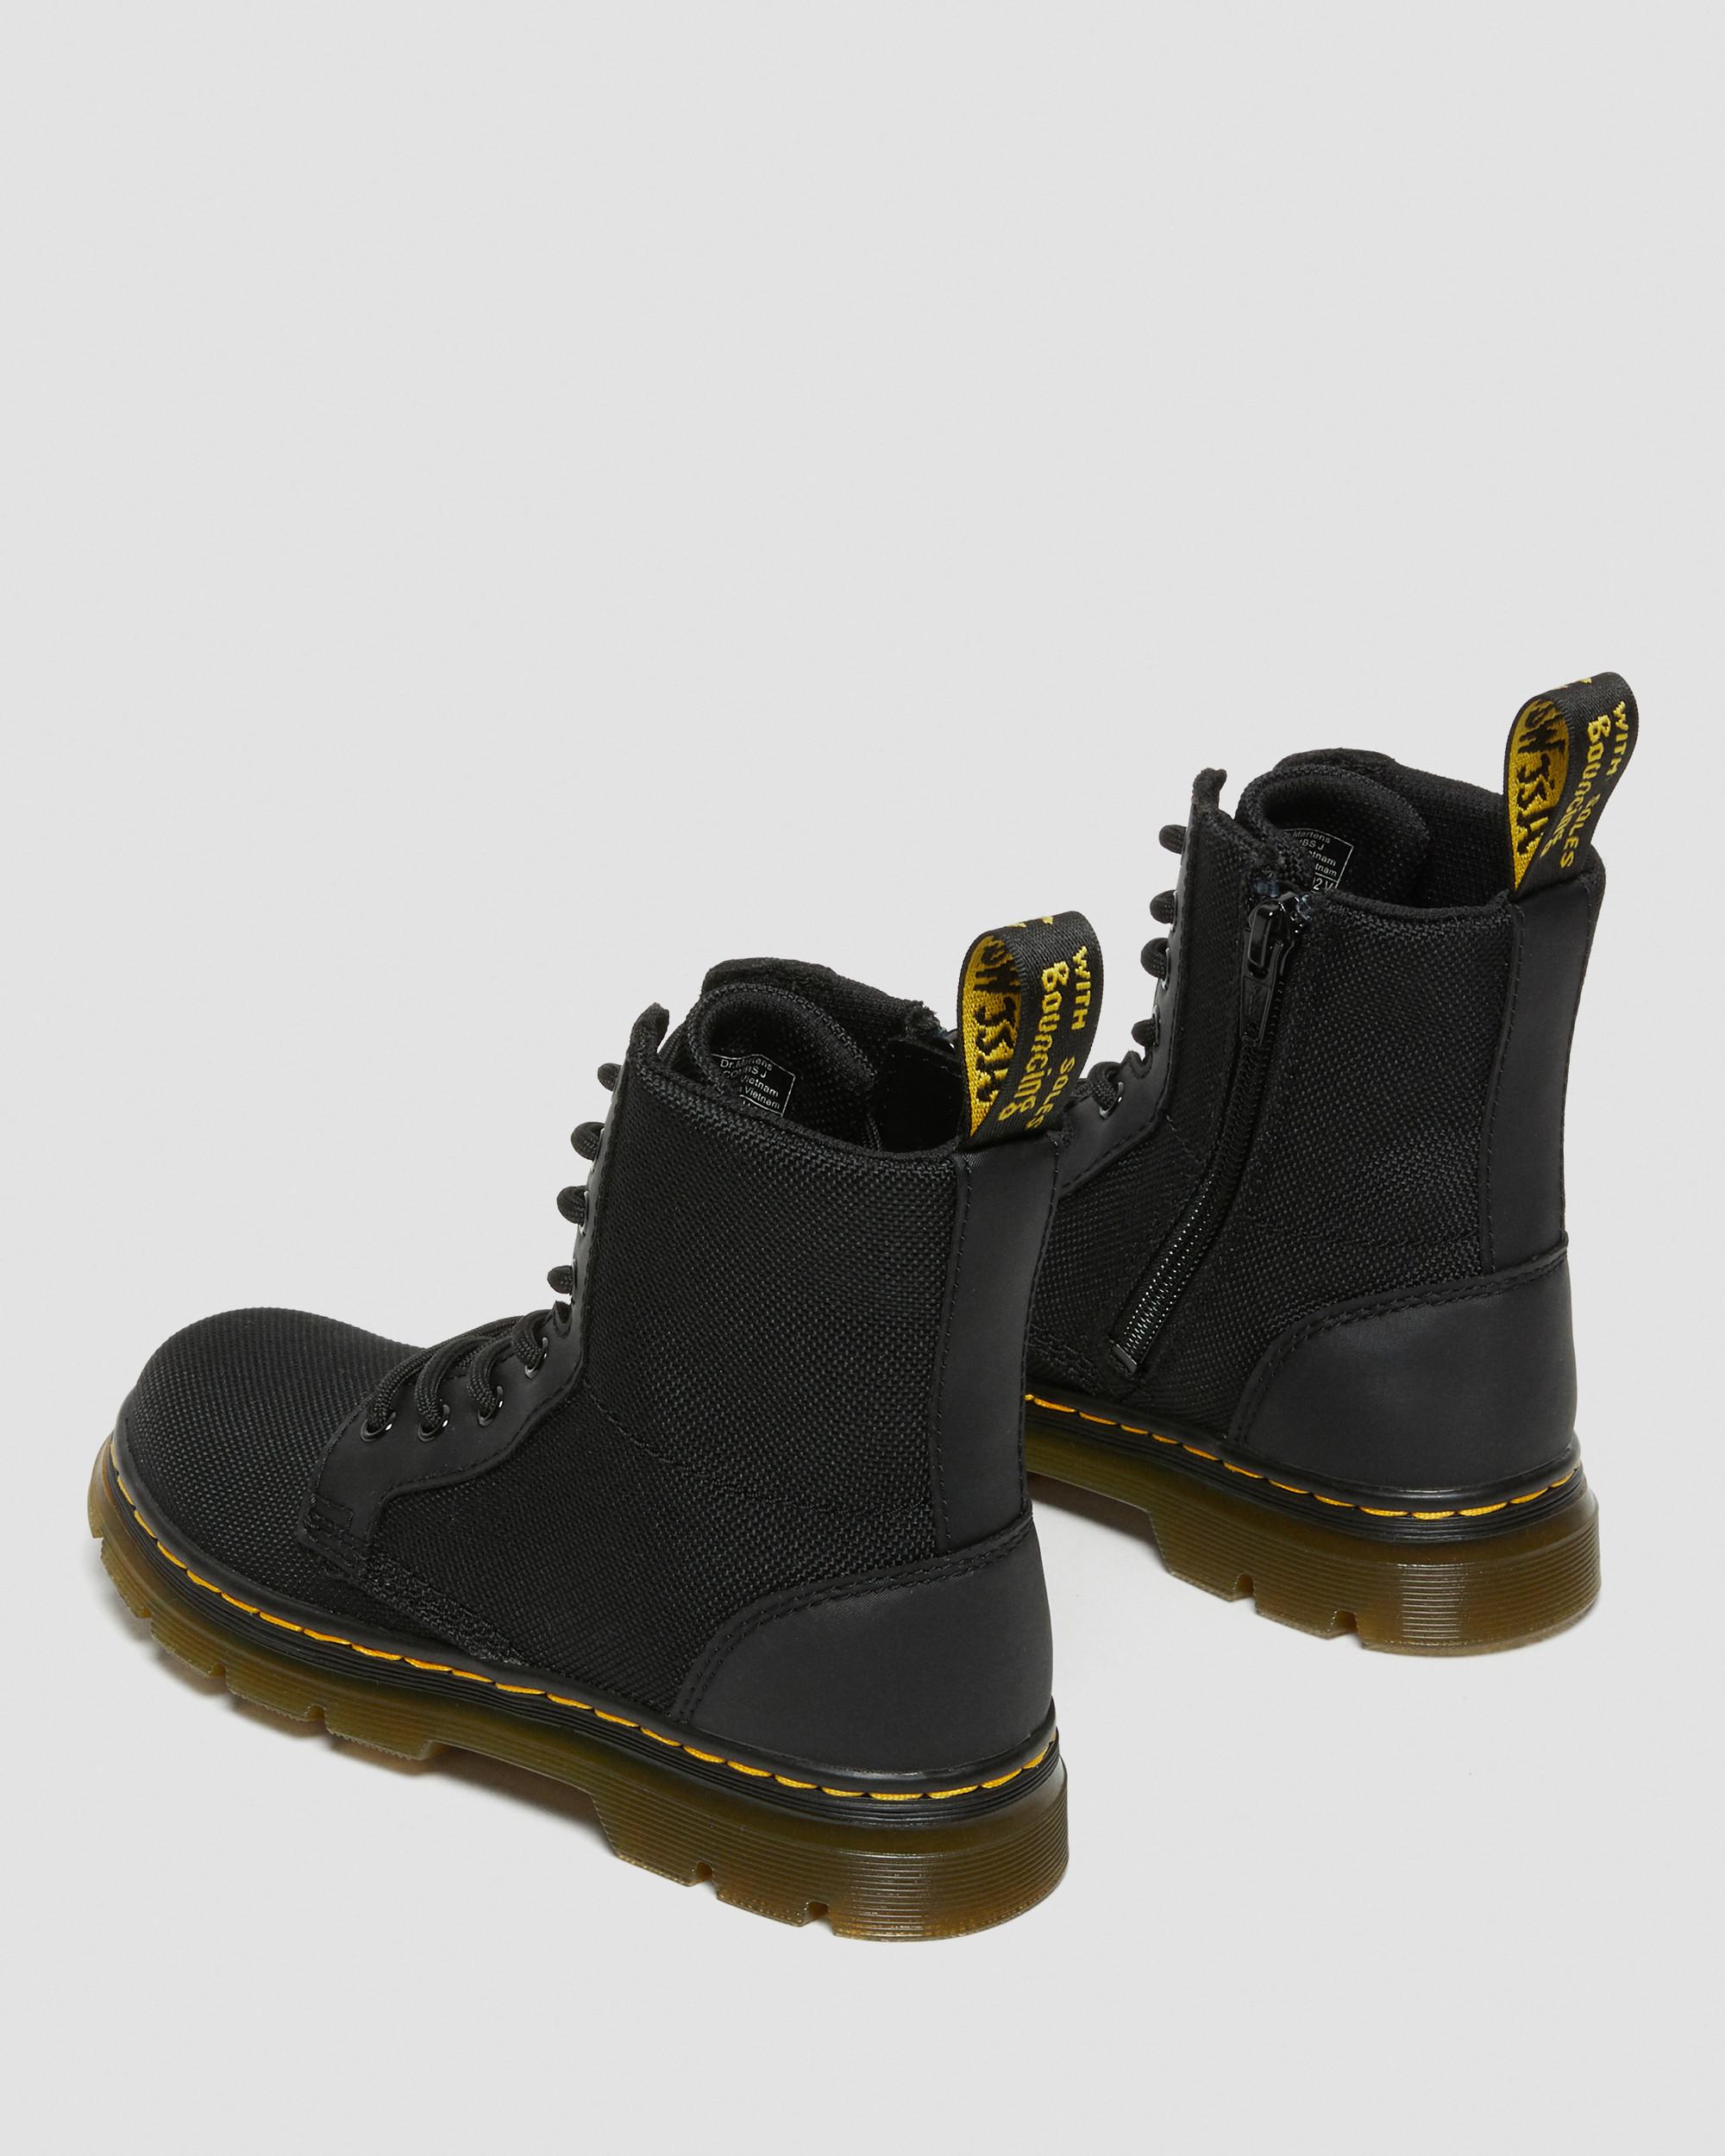 Junior Combs Extra Tough Utility Boots in Black | Dr. Martens